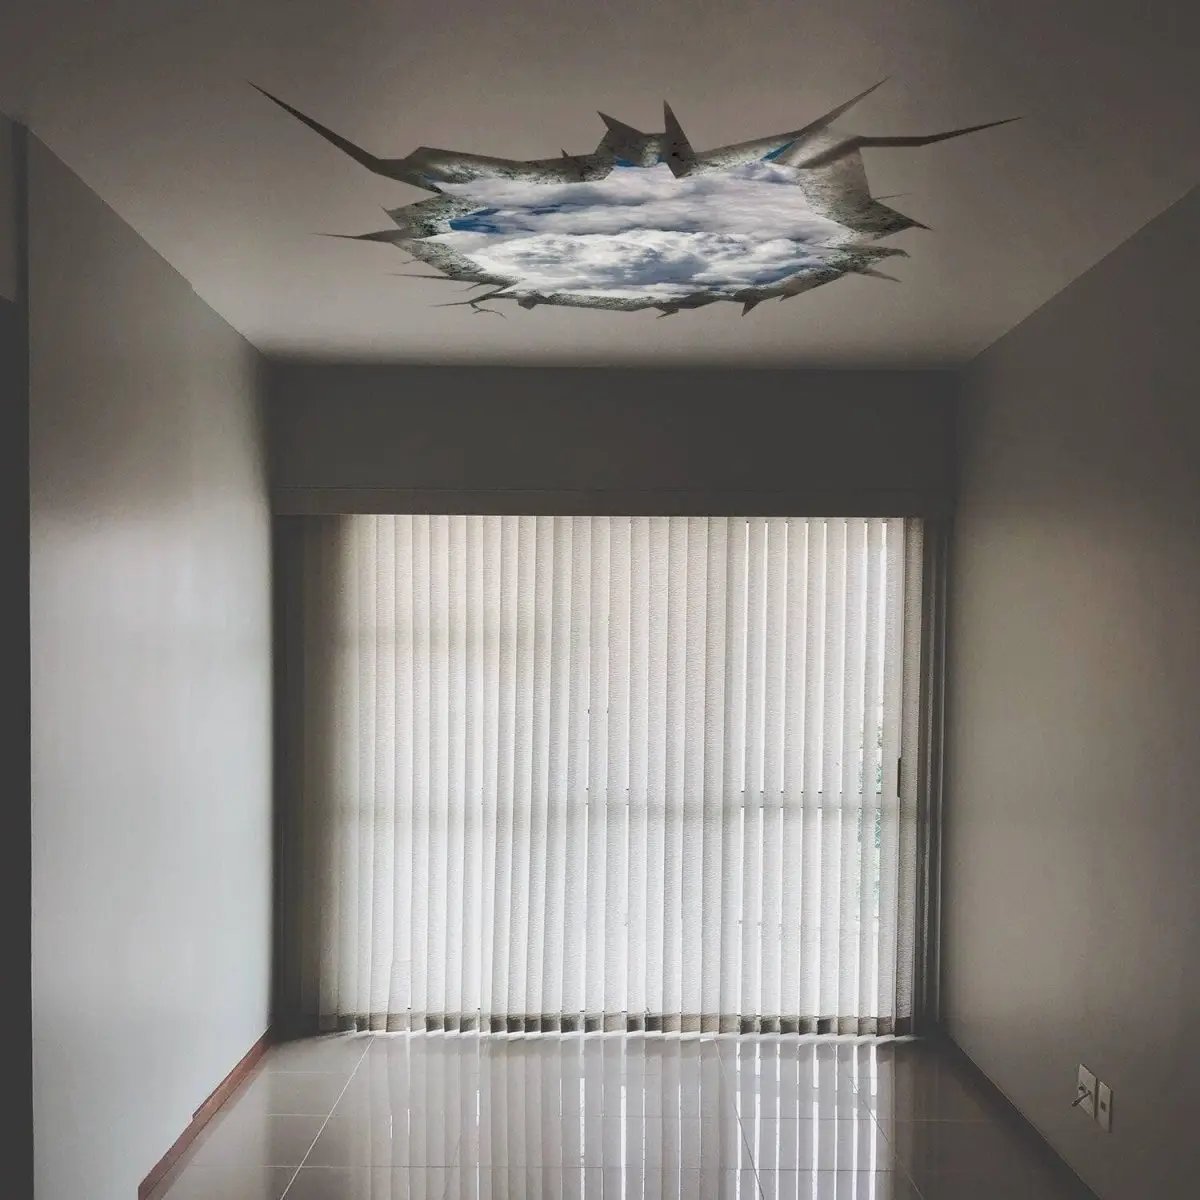 Breathtaking Sky Cracked Illusion - 3D Ceiling Sticker - Decords